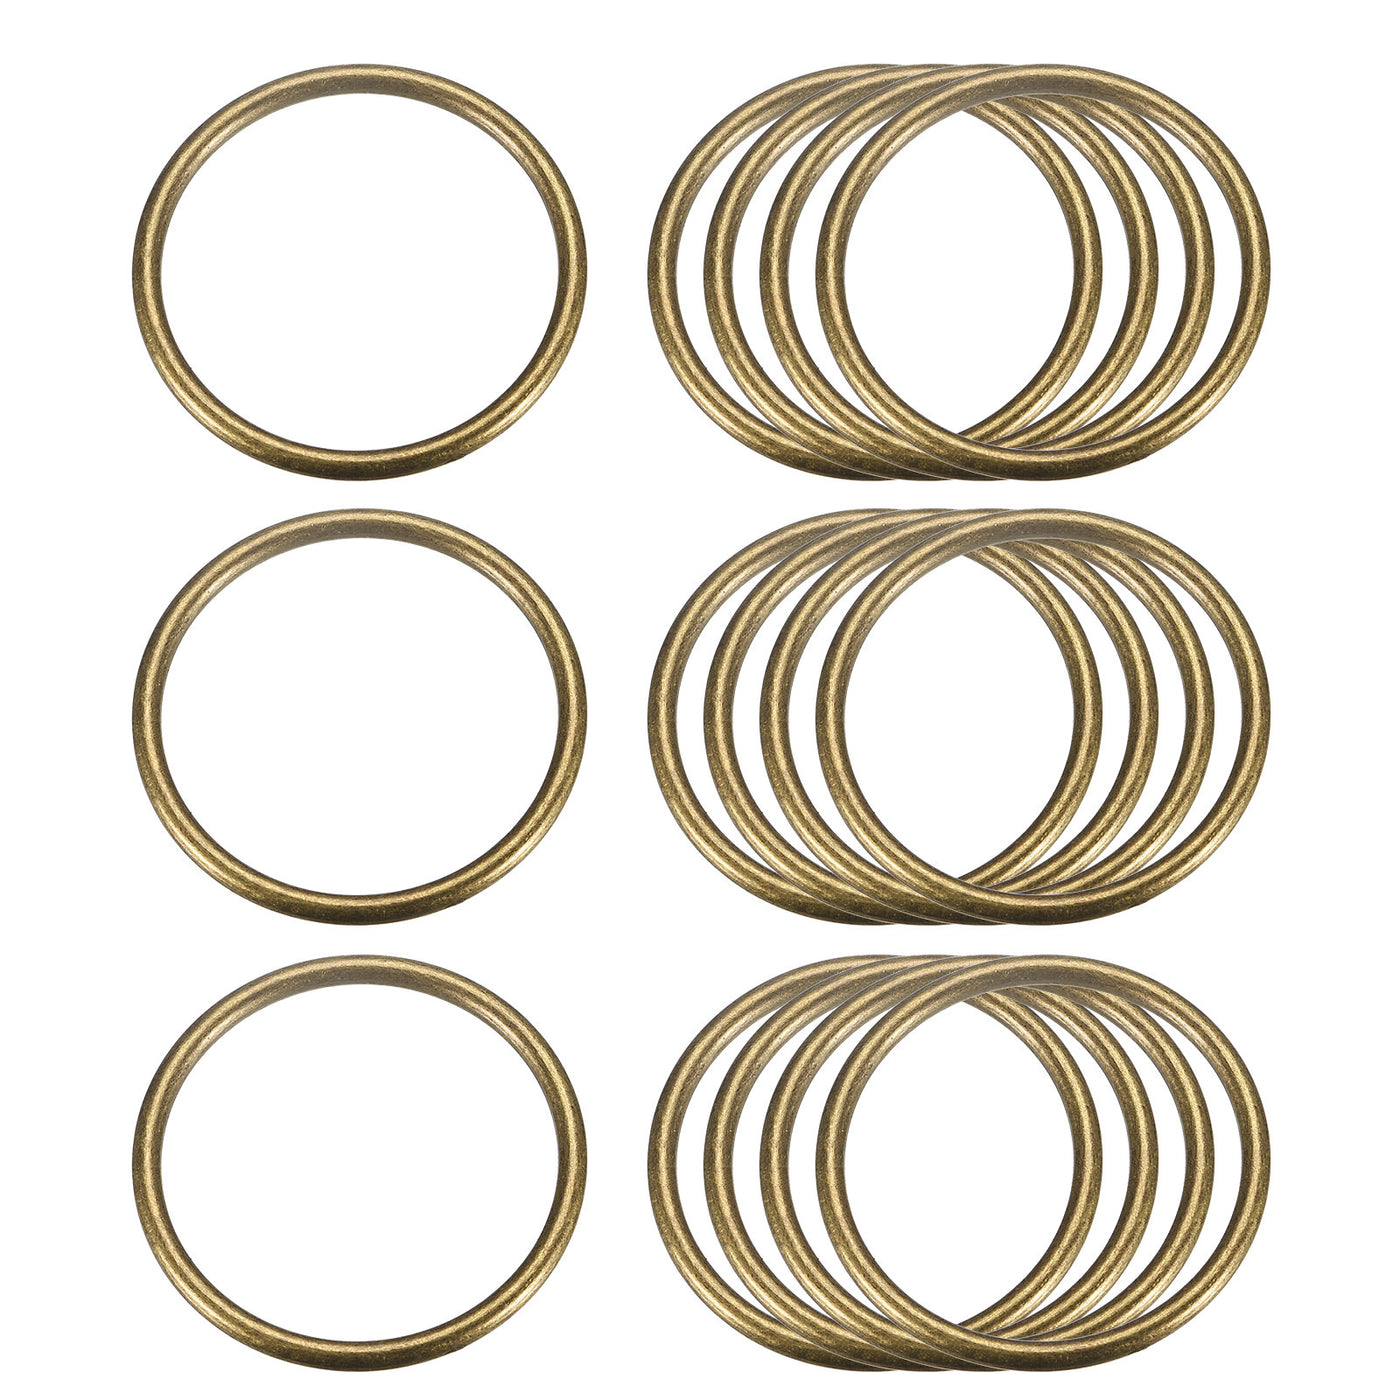 uxcell Uxcell Metal O Rings, 15pcs 40mm(1.57") ID 3mm Thick Welded O-Ringe, Bronze Tone